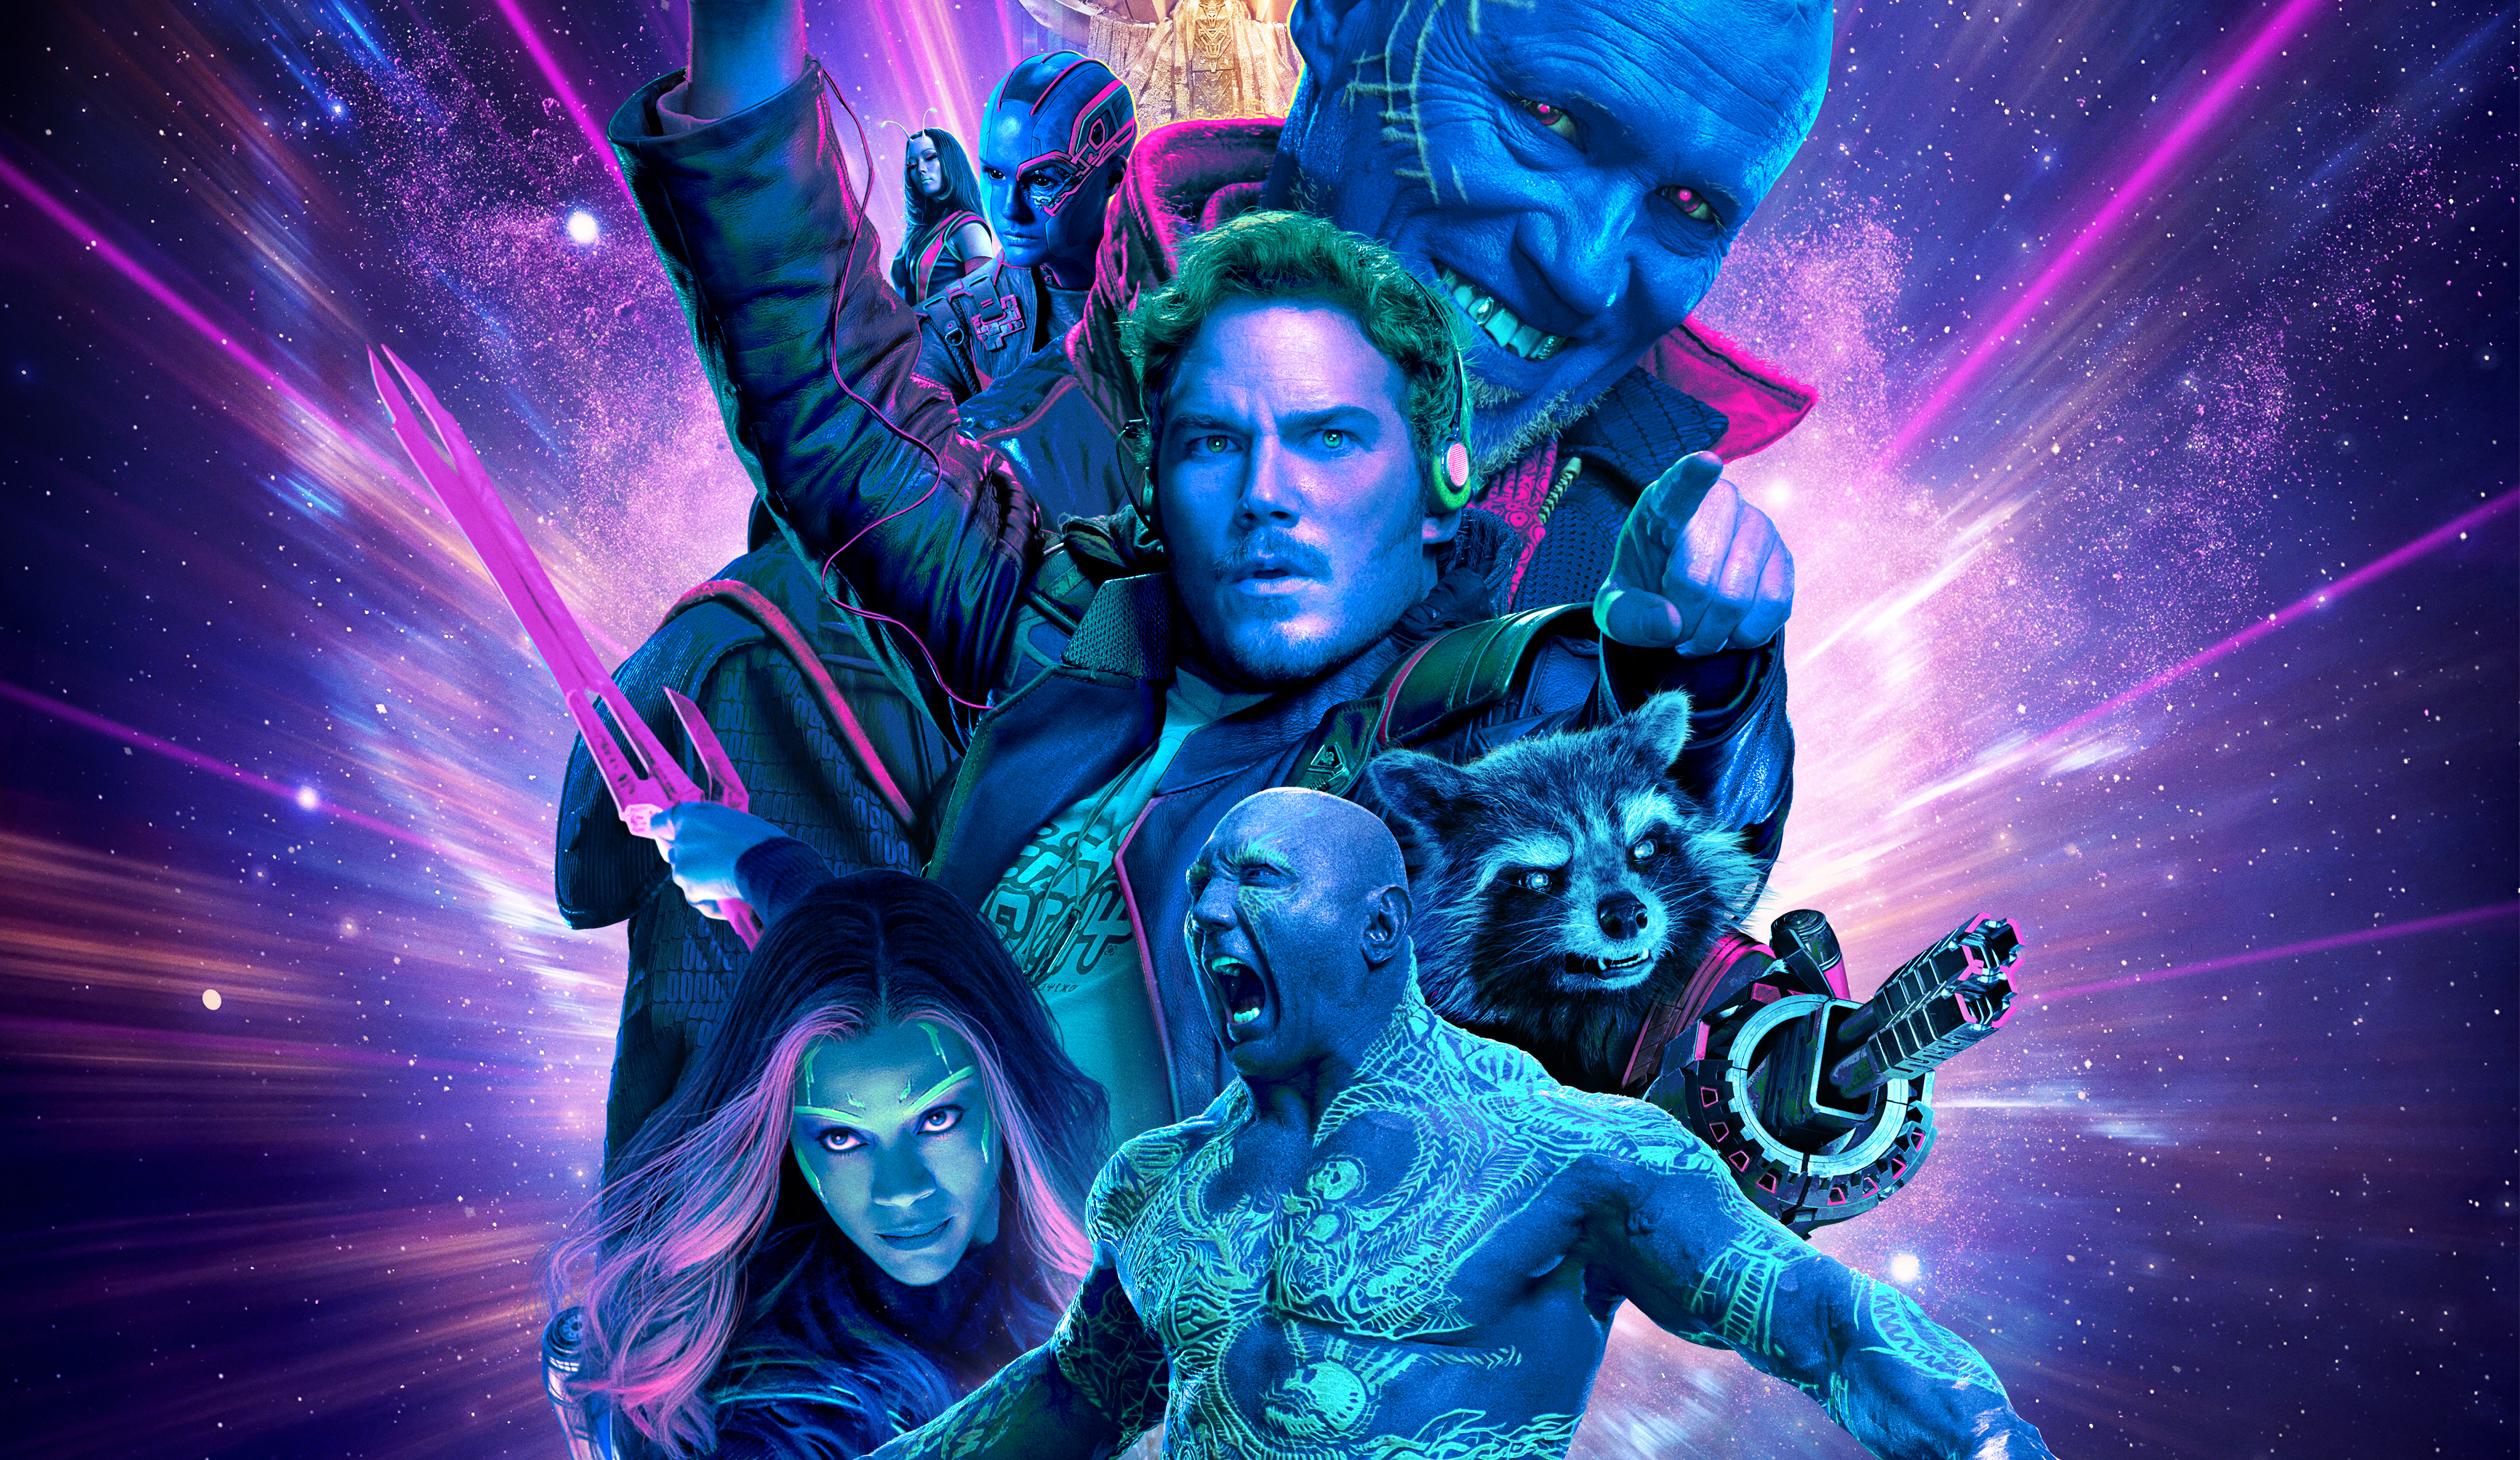 Guardians of the Galaxy Vol 3 for mac download free